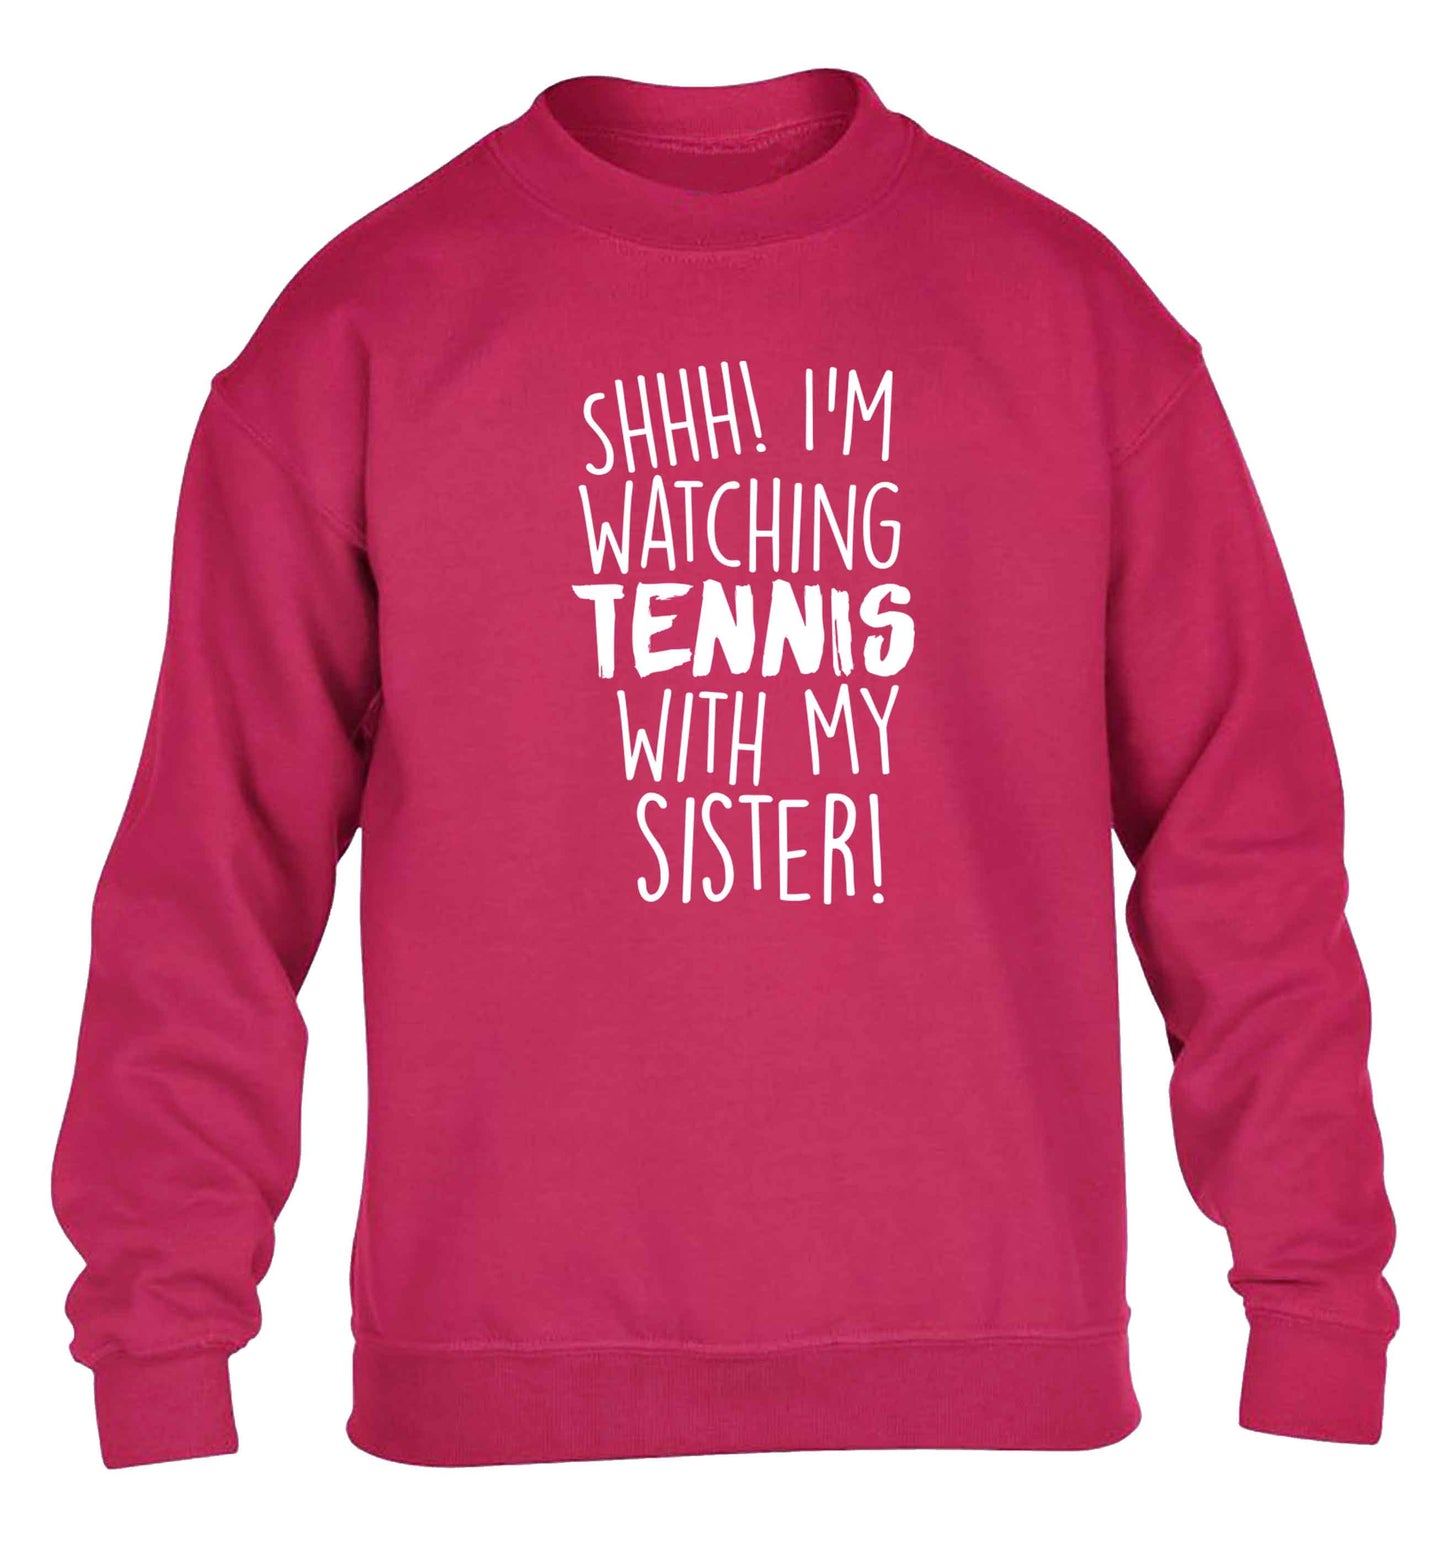 Shh! I'm watching tennis with my sister! children's pink sweater 12-13 Years